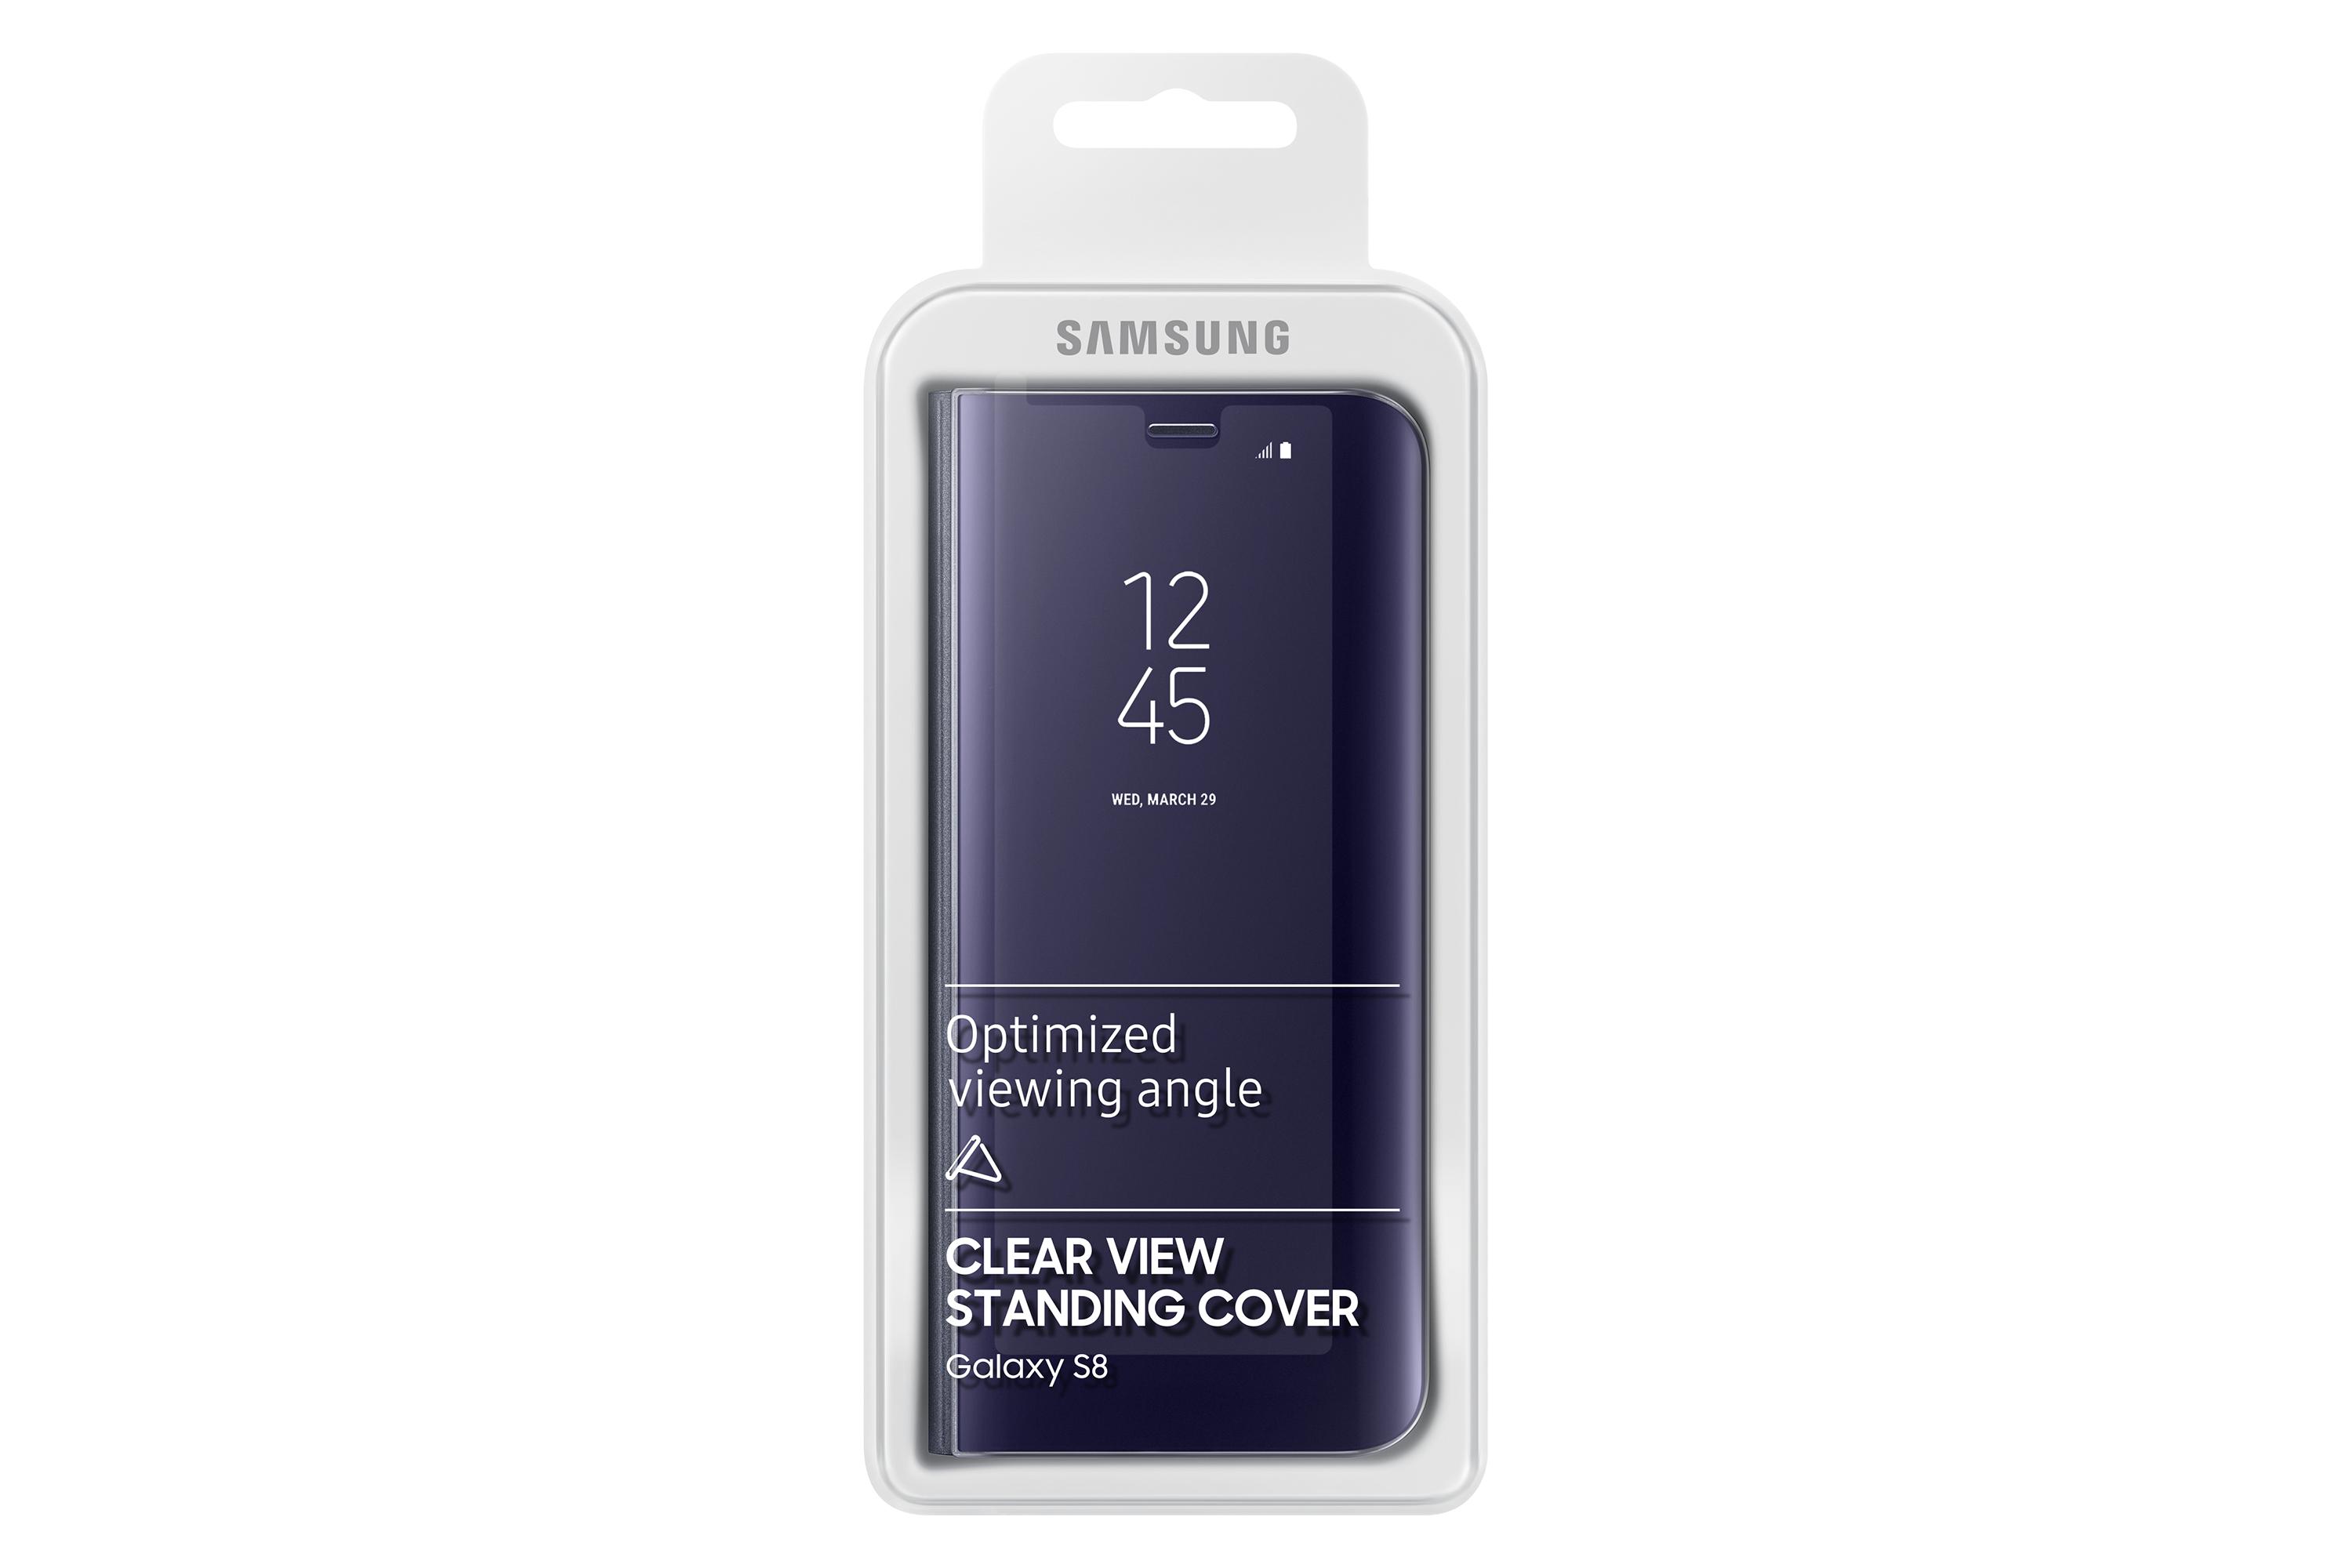 Samsung clear standing. Чехол Samsung Clear view standing Cover s9+, фиолетовый. Samsung Clear view standing Cover. Samsung s8 чехол EF-zg950. Samsung Clear view Stand Cover.